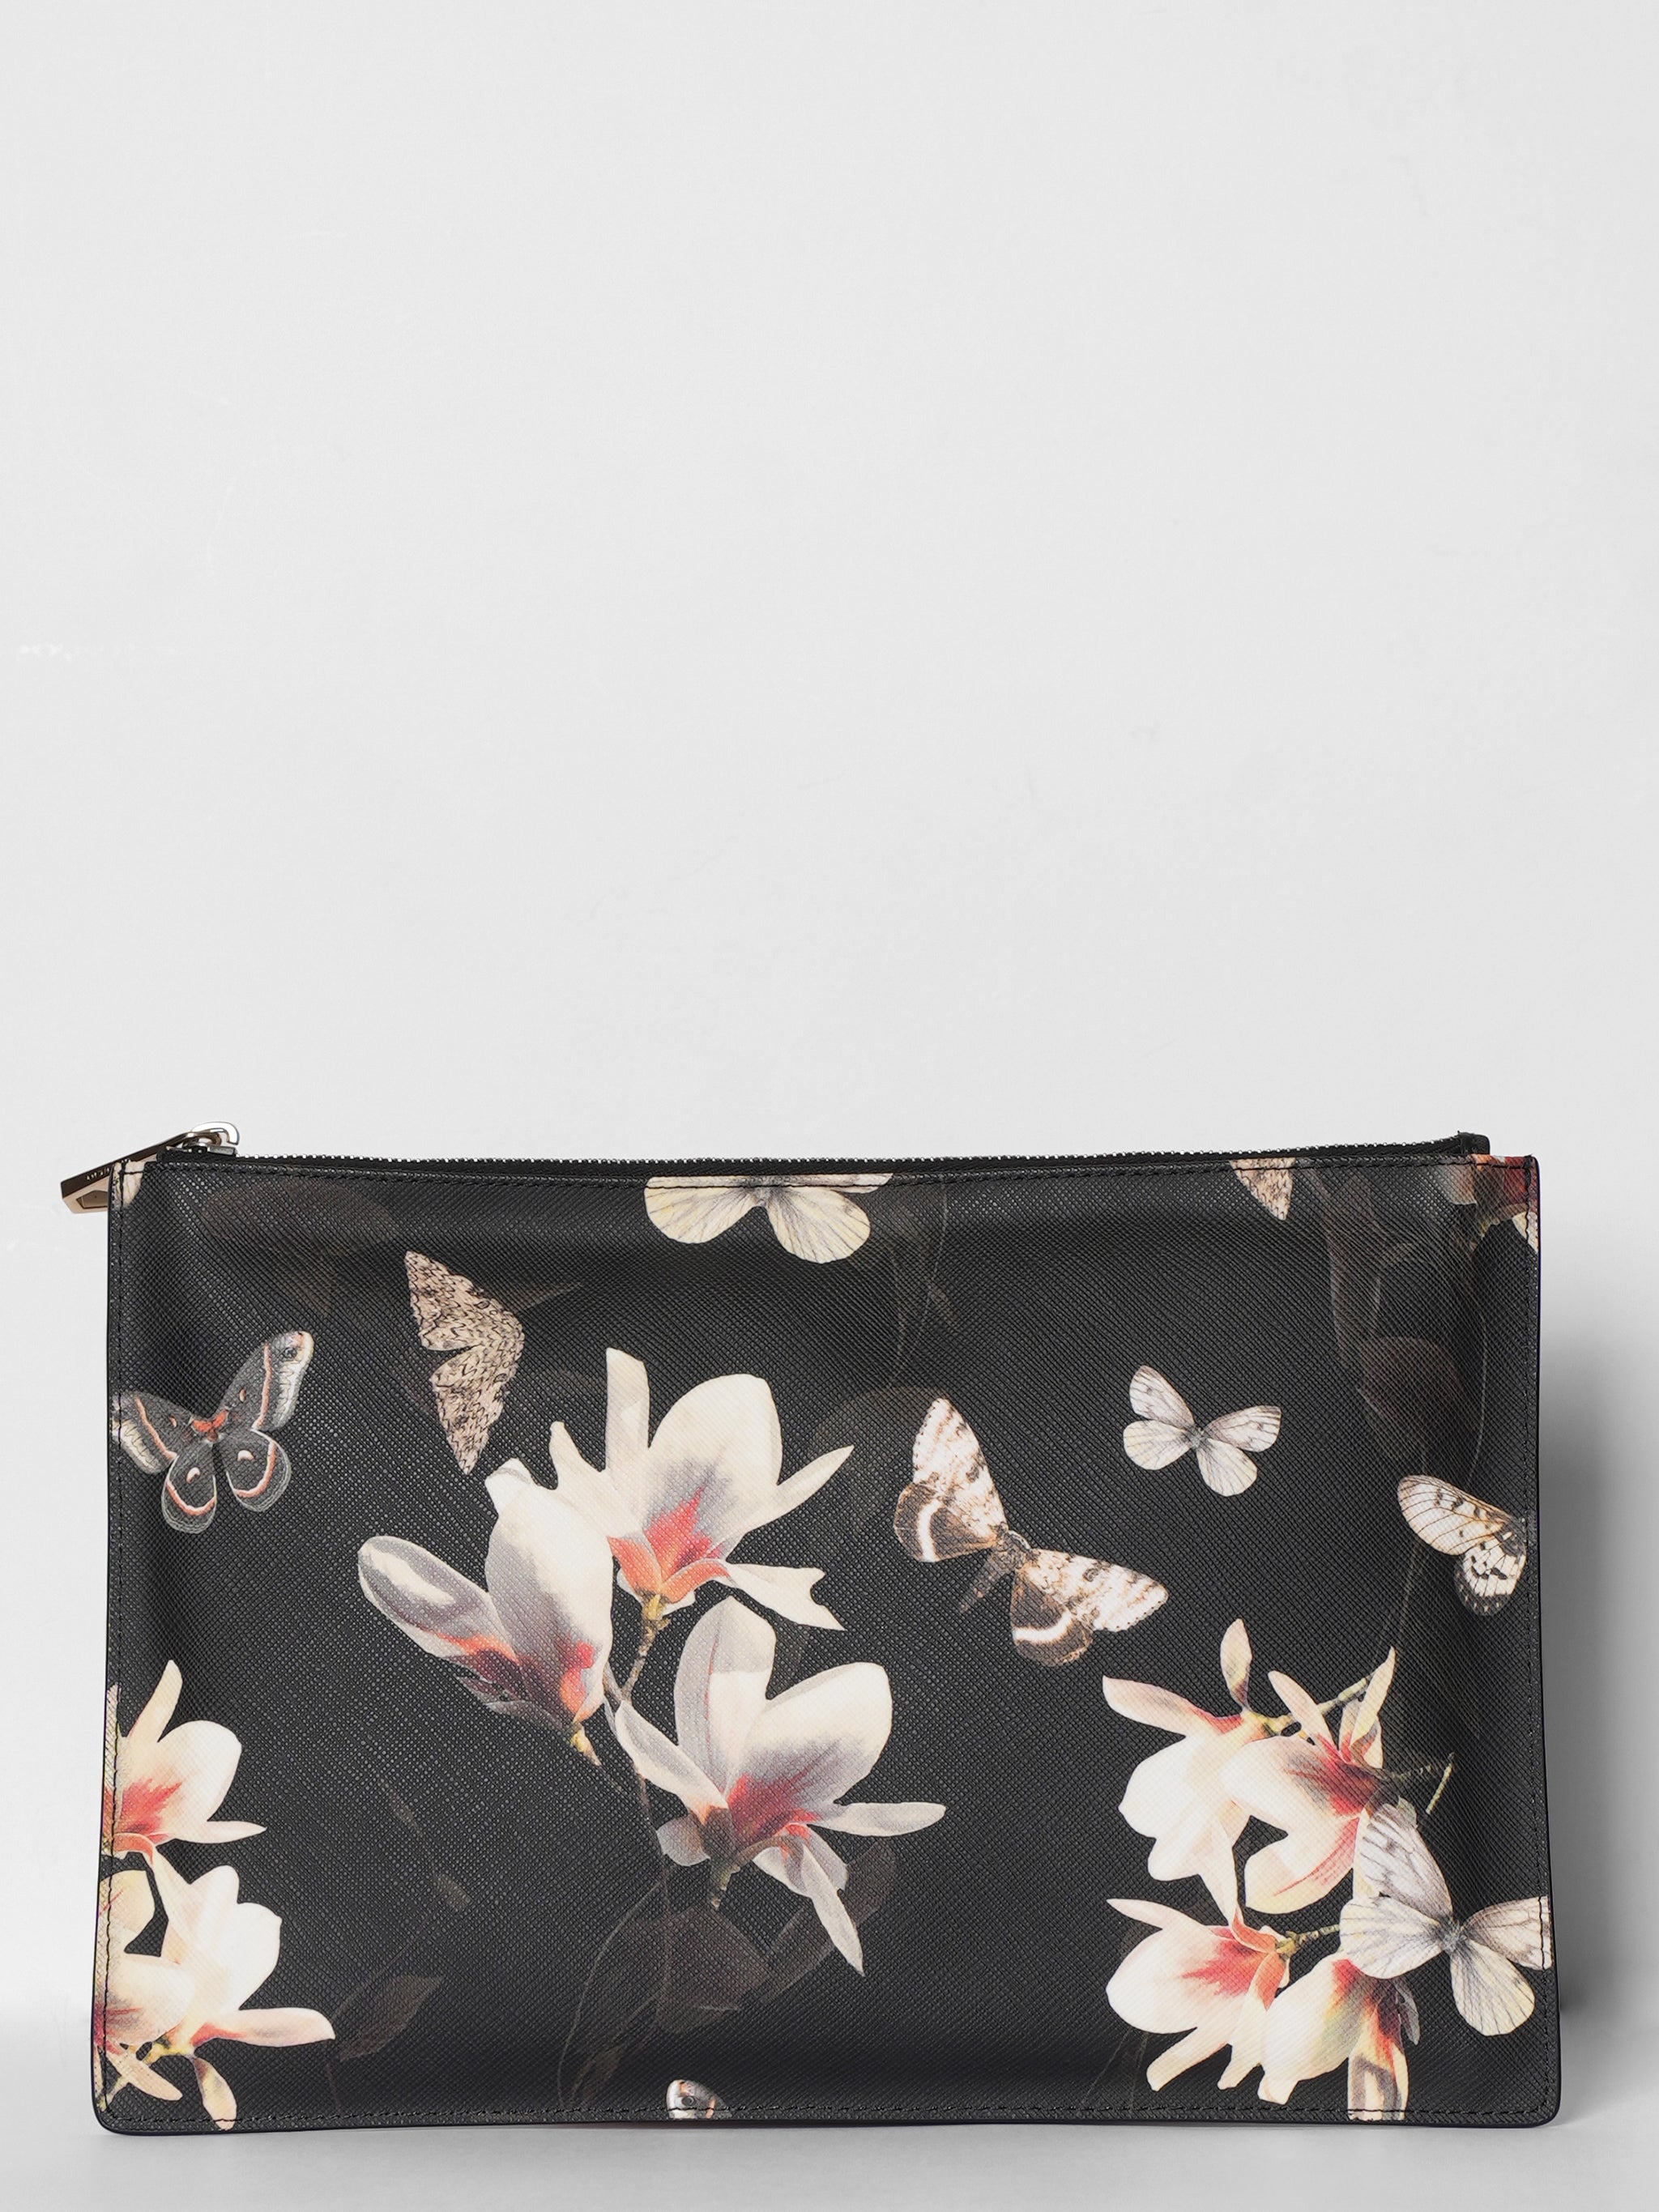 Givenchy Floral Printed Clutch